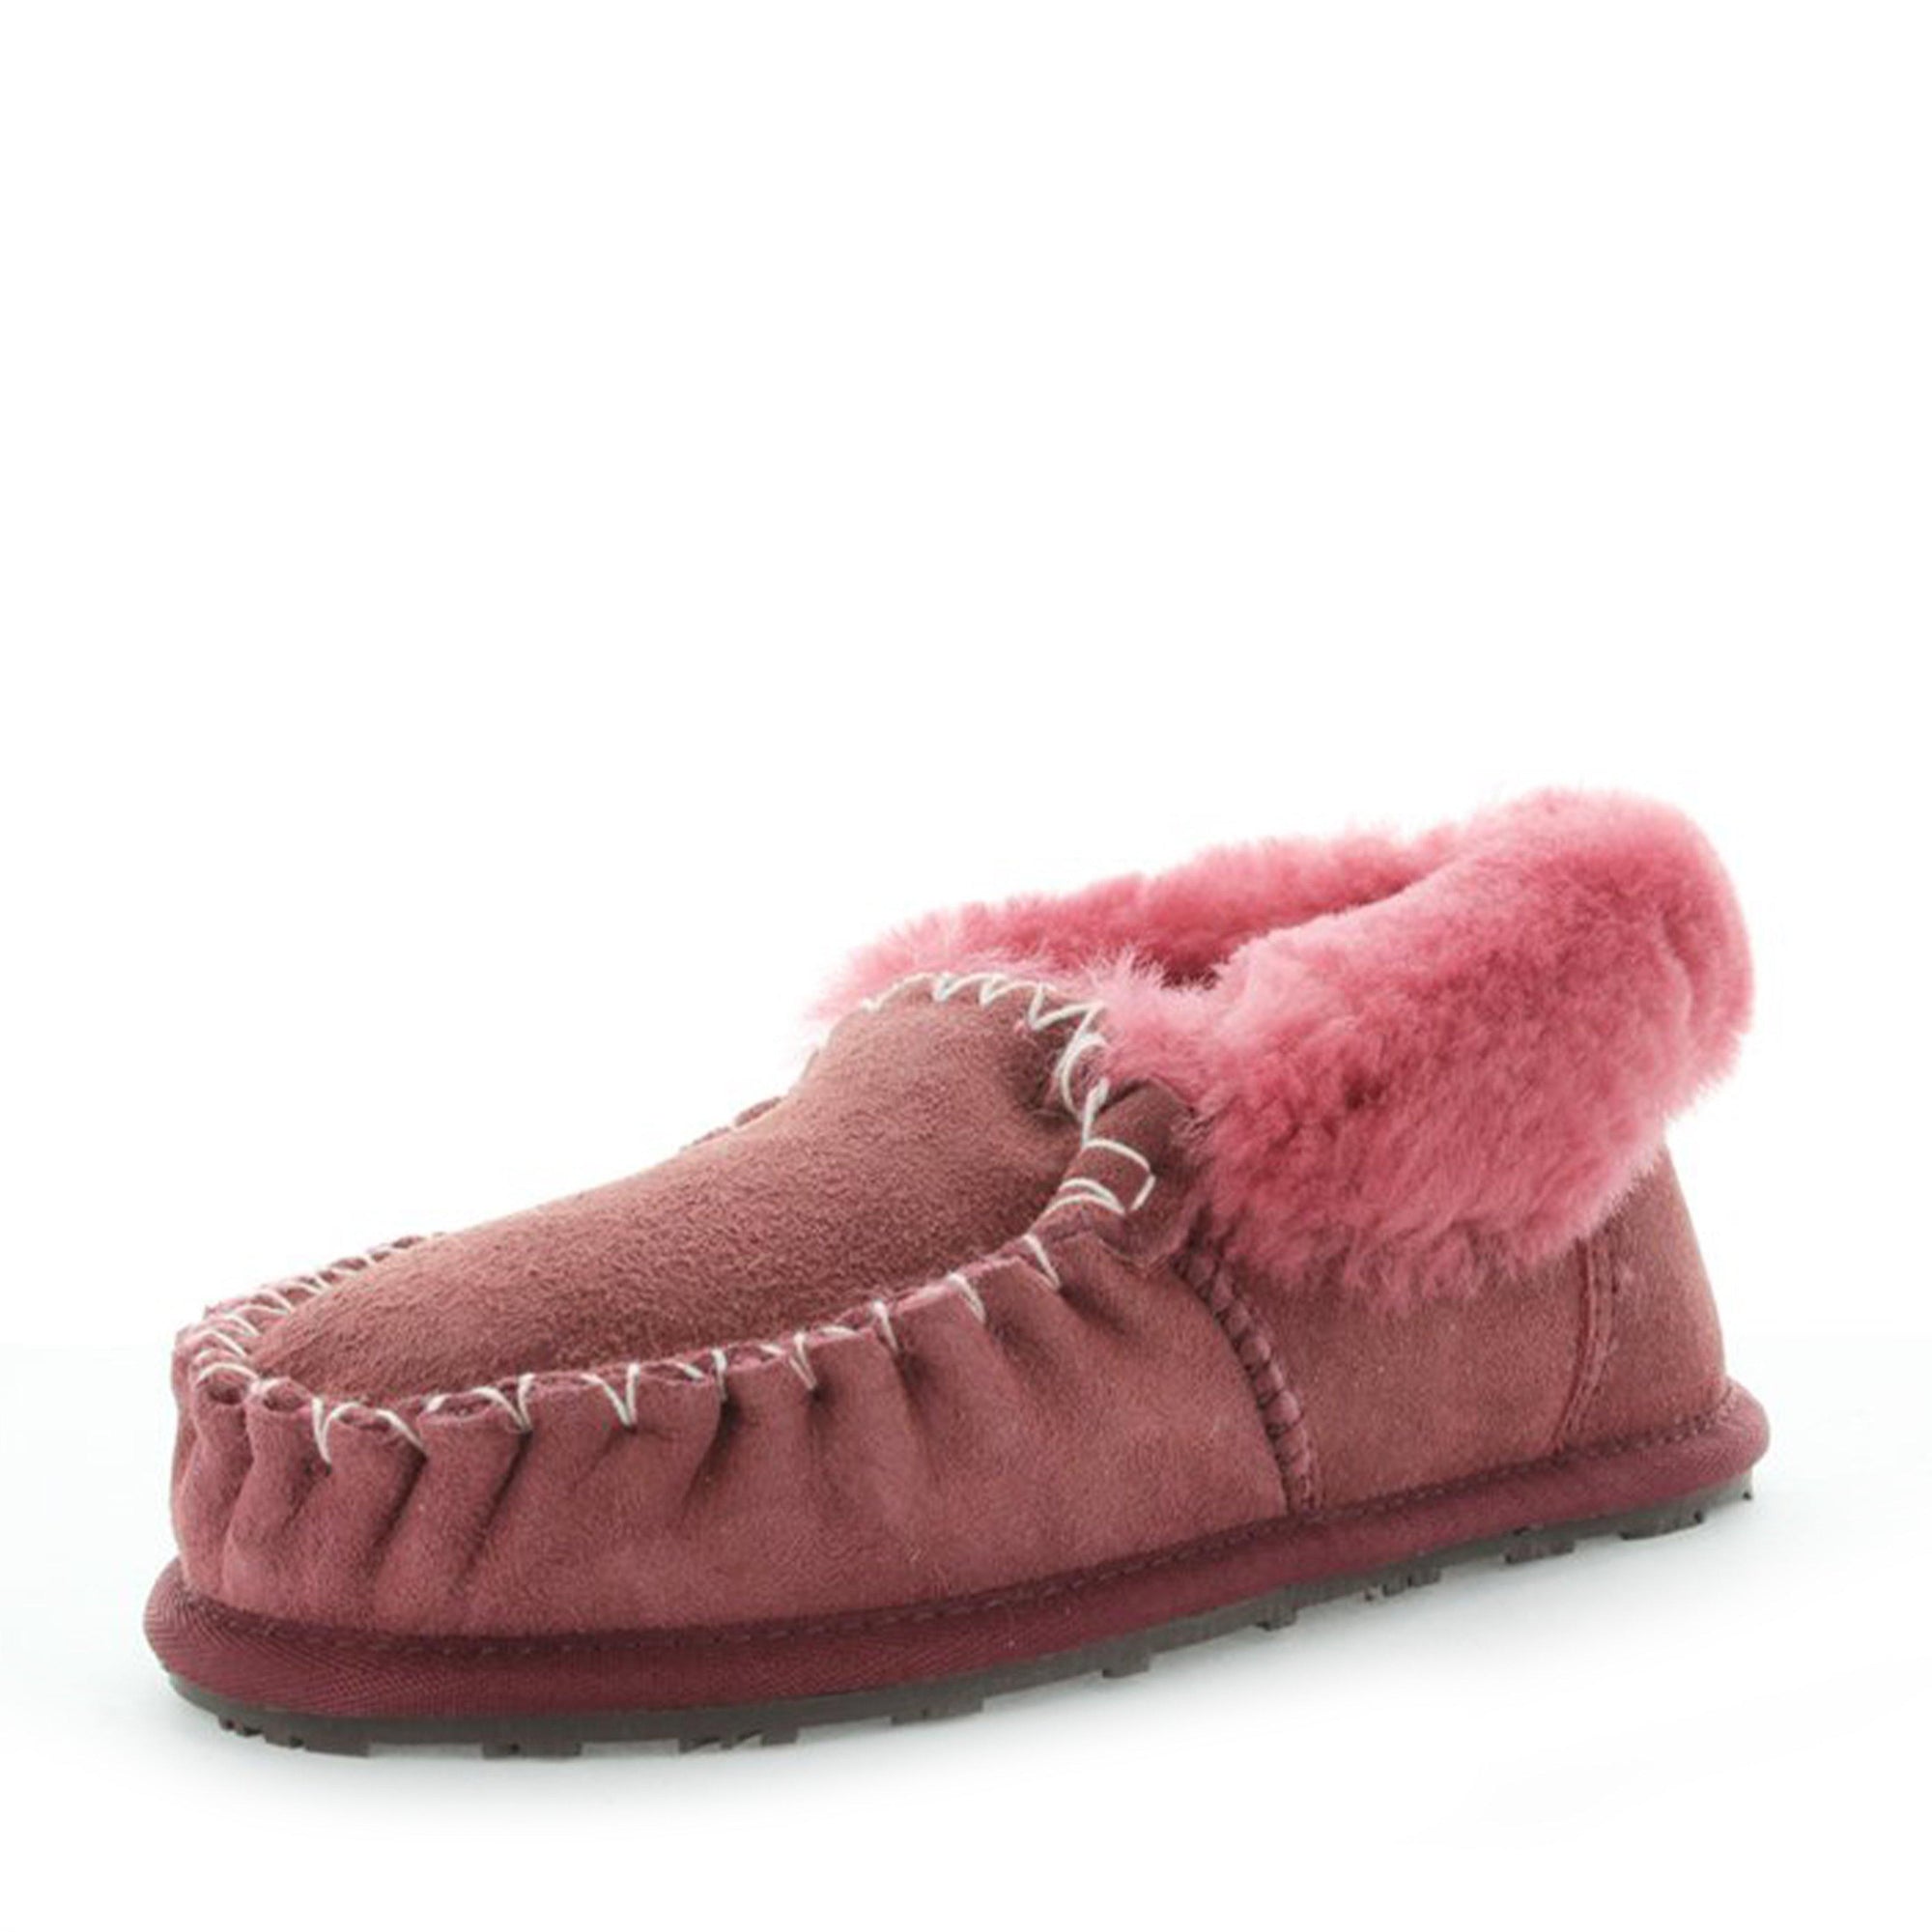 MOCCASIN R - iShoes